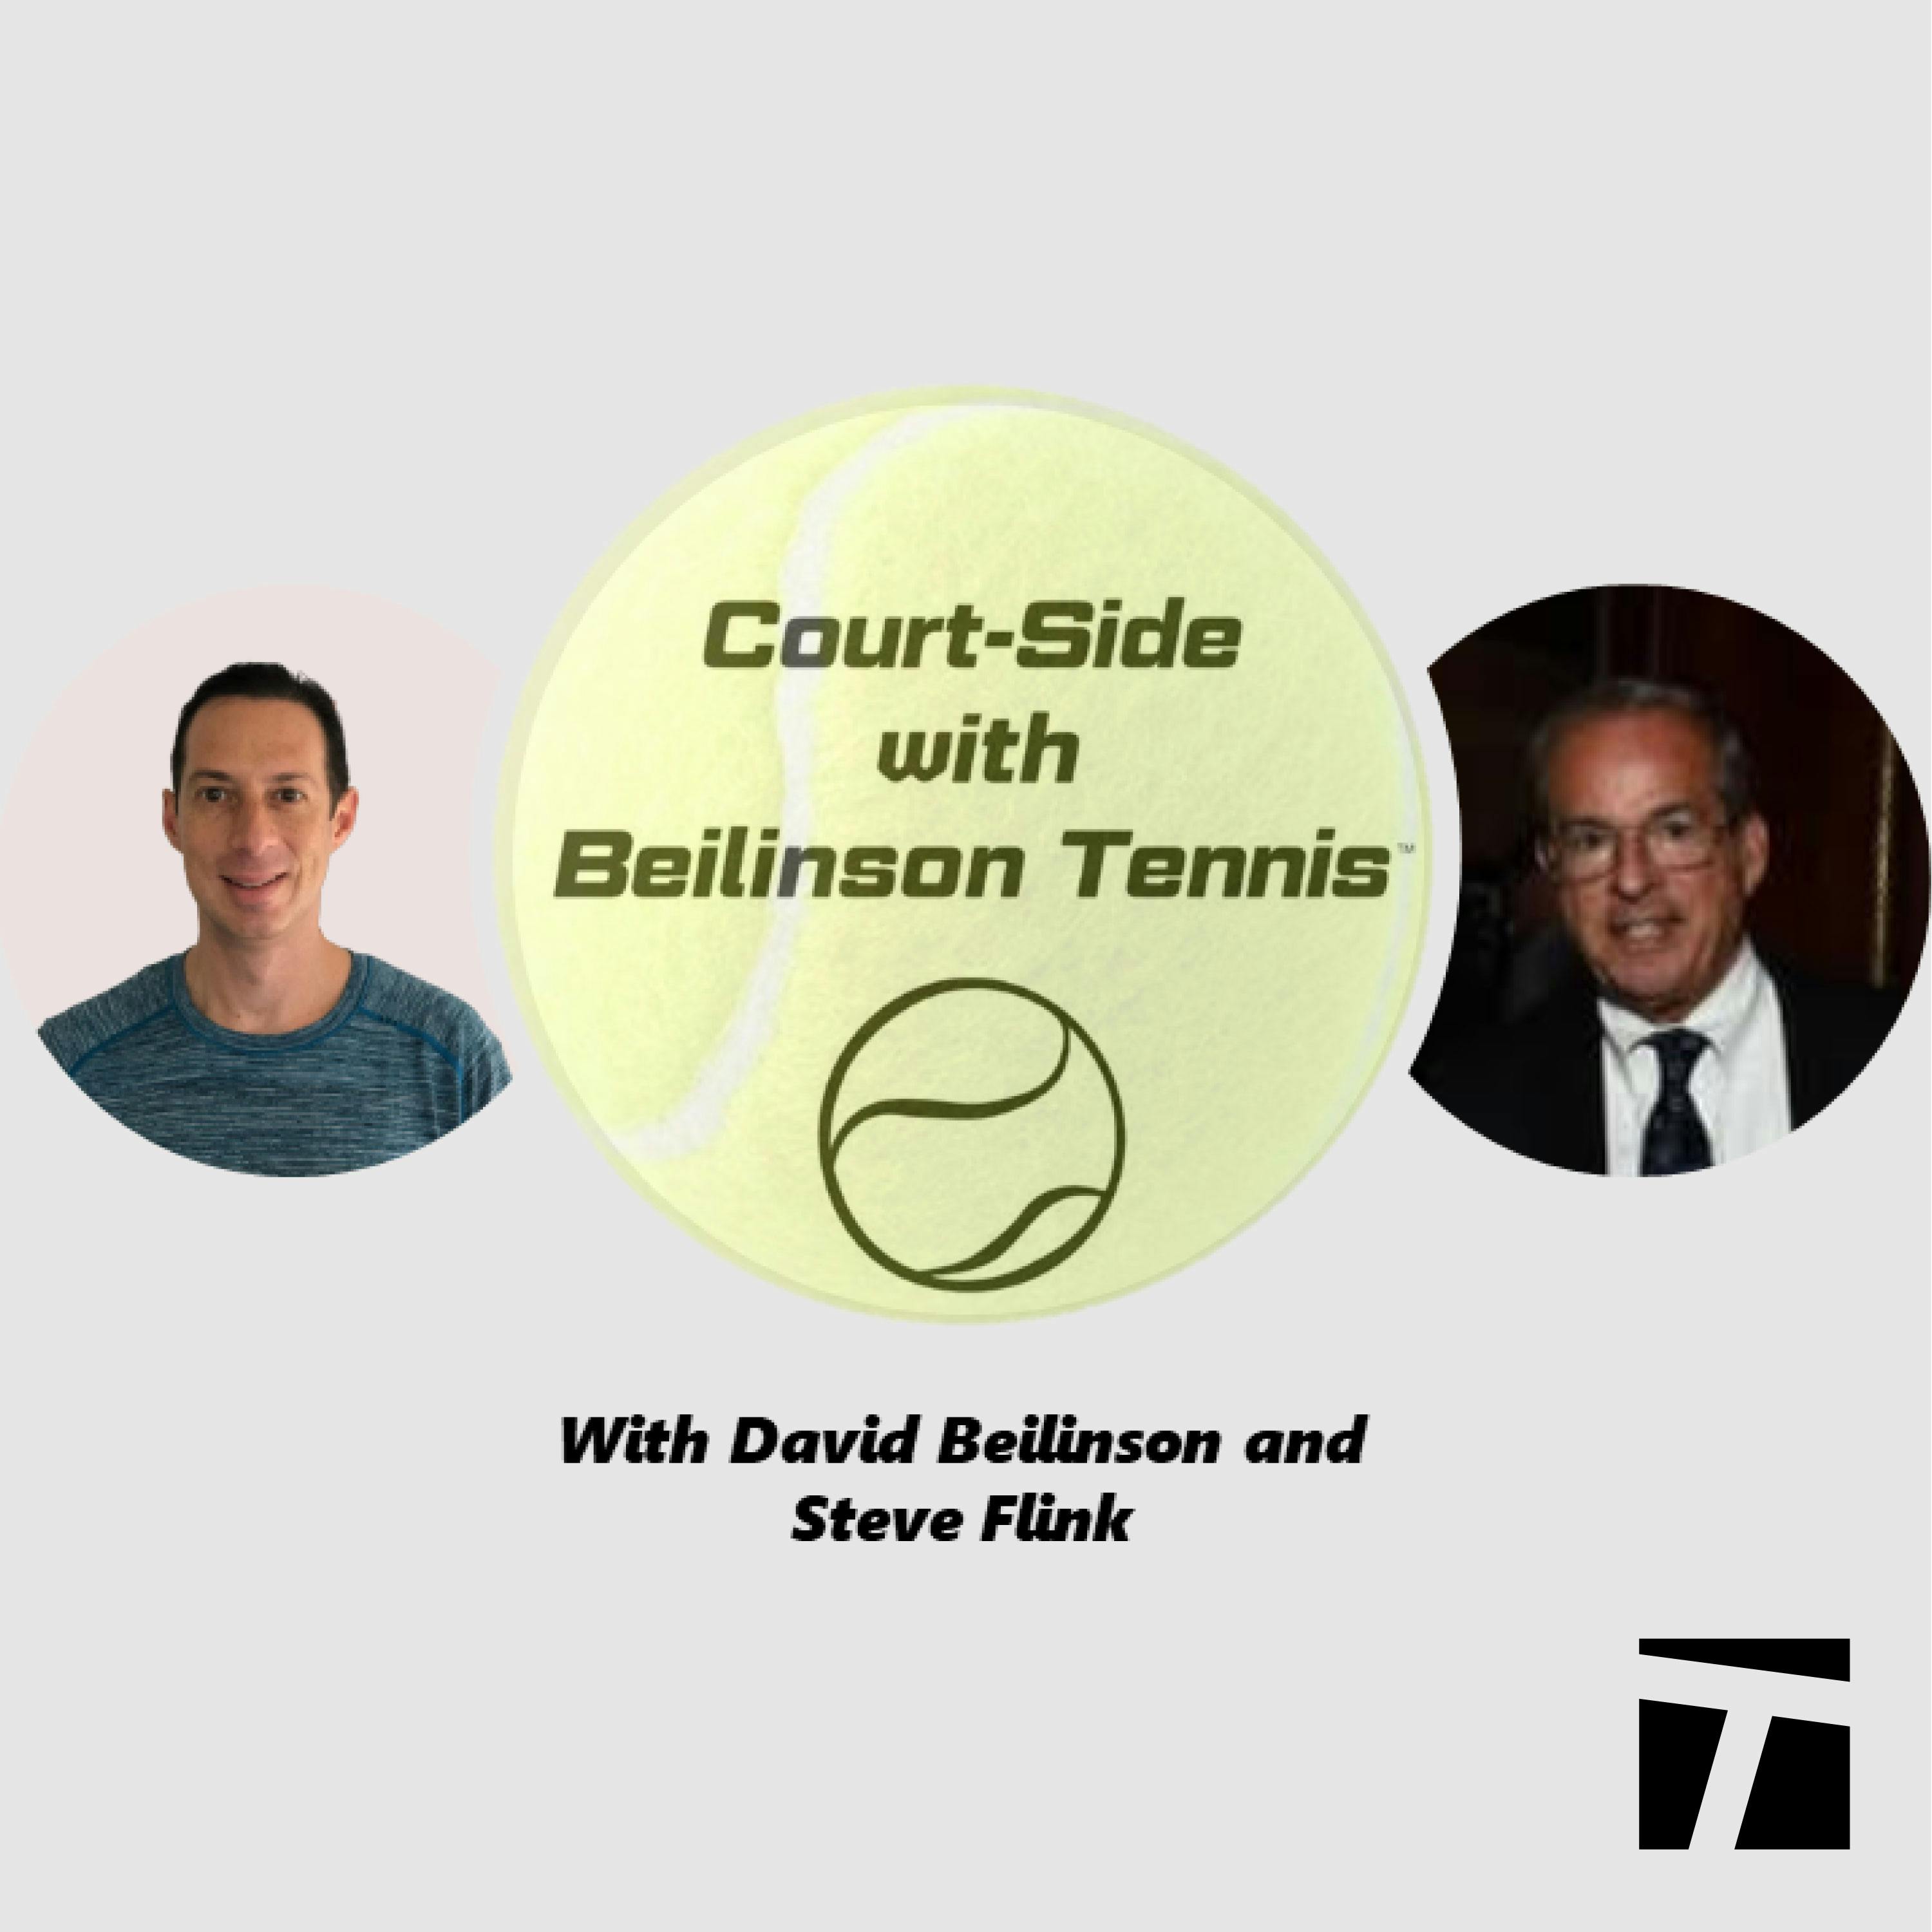 More Fall Updates - Ben Shelton, Erste Final, WTA Finals Preview Talk and More!